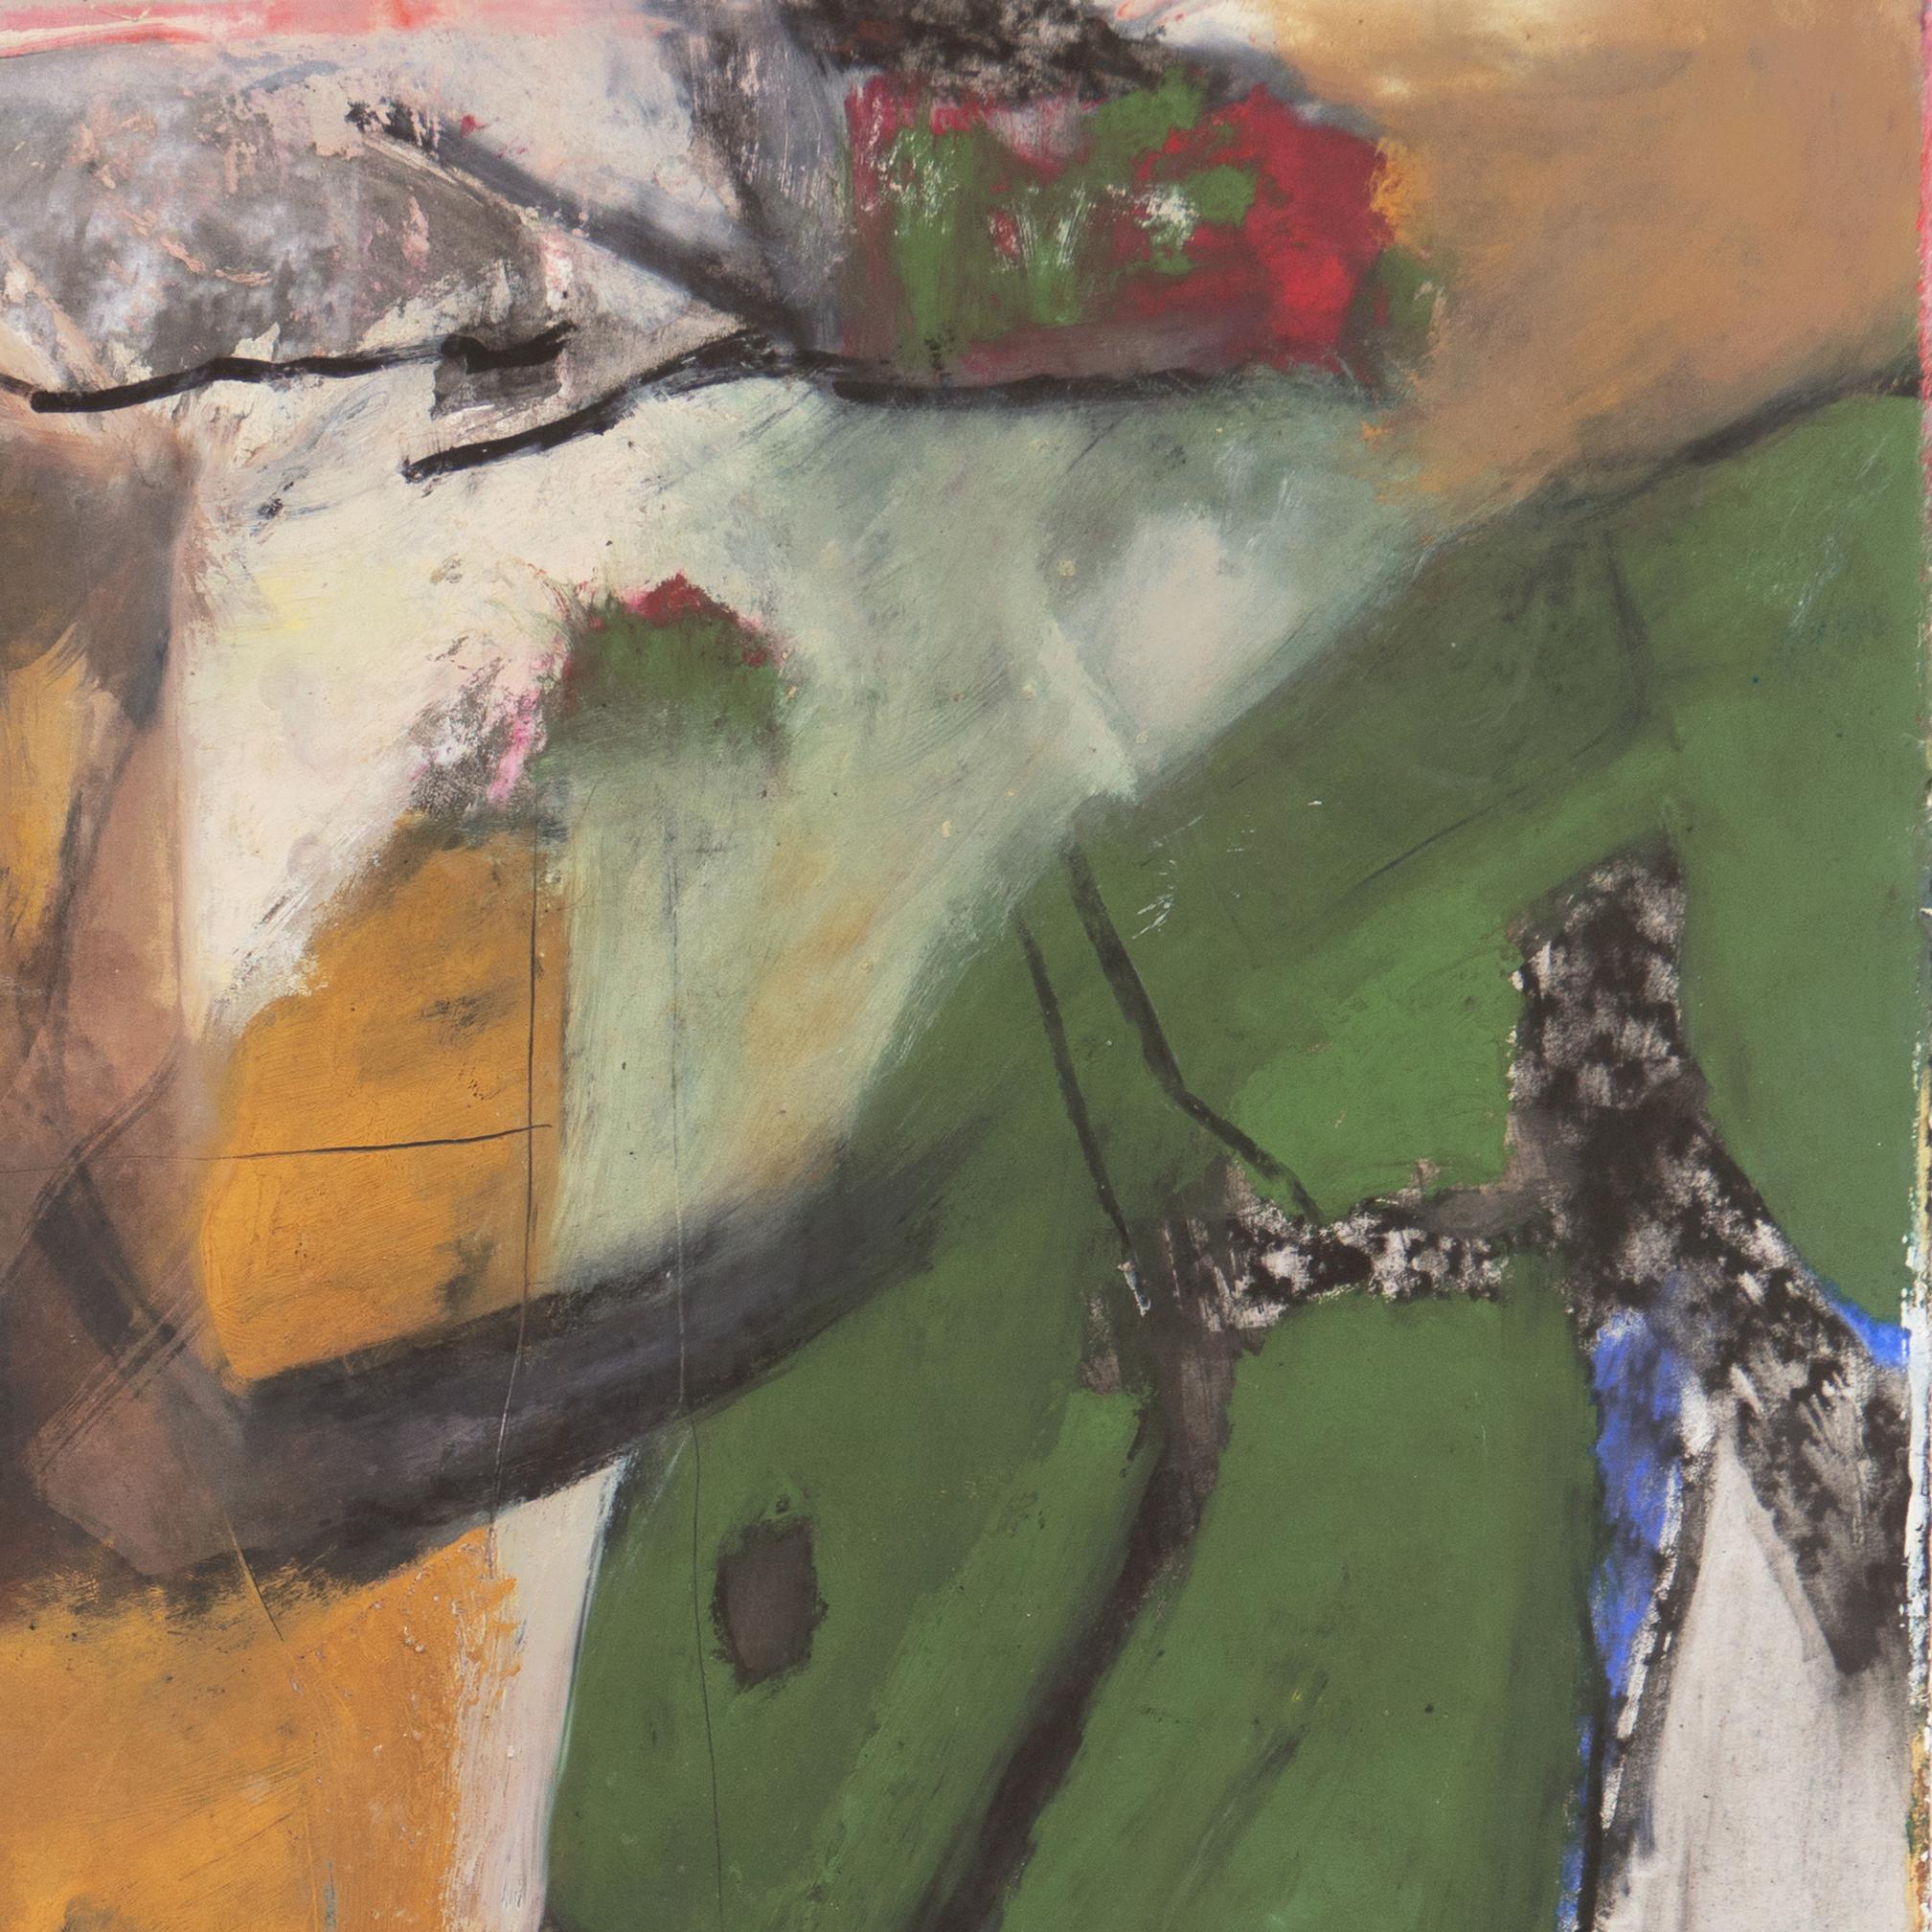 'Hommage à Chagall', Large Bay Area Abstract Oil, San Francisco Art Institute - Gray Abstract Painting by Kevin Keaney